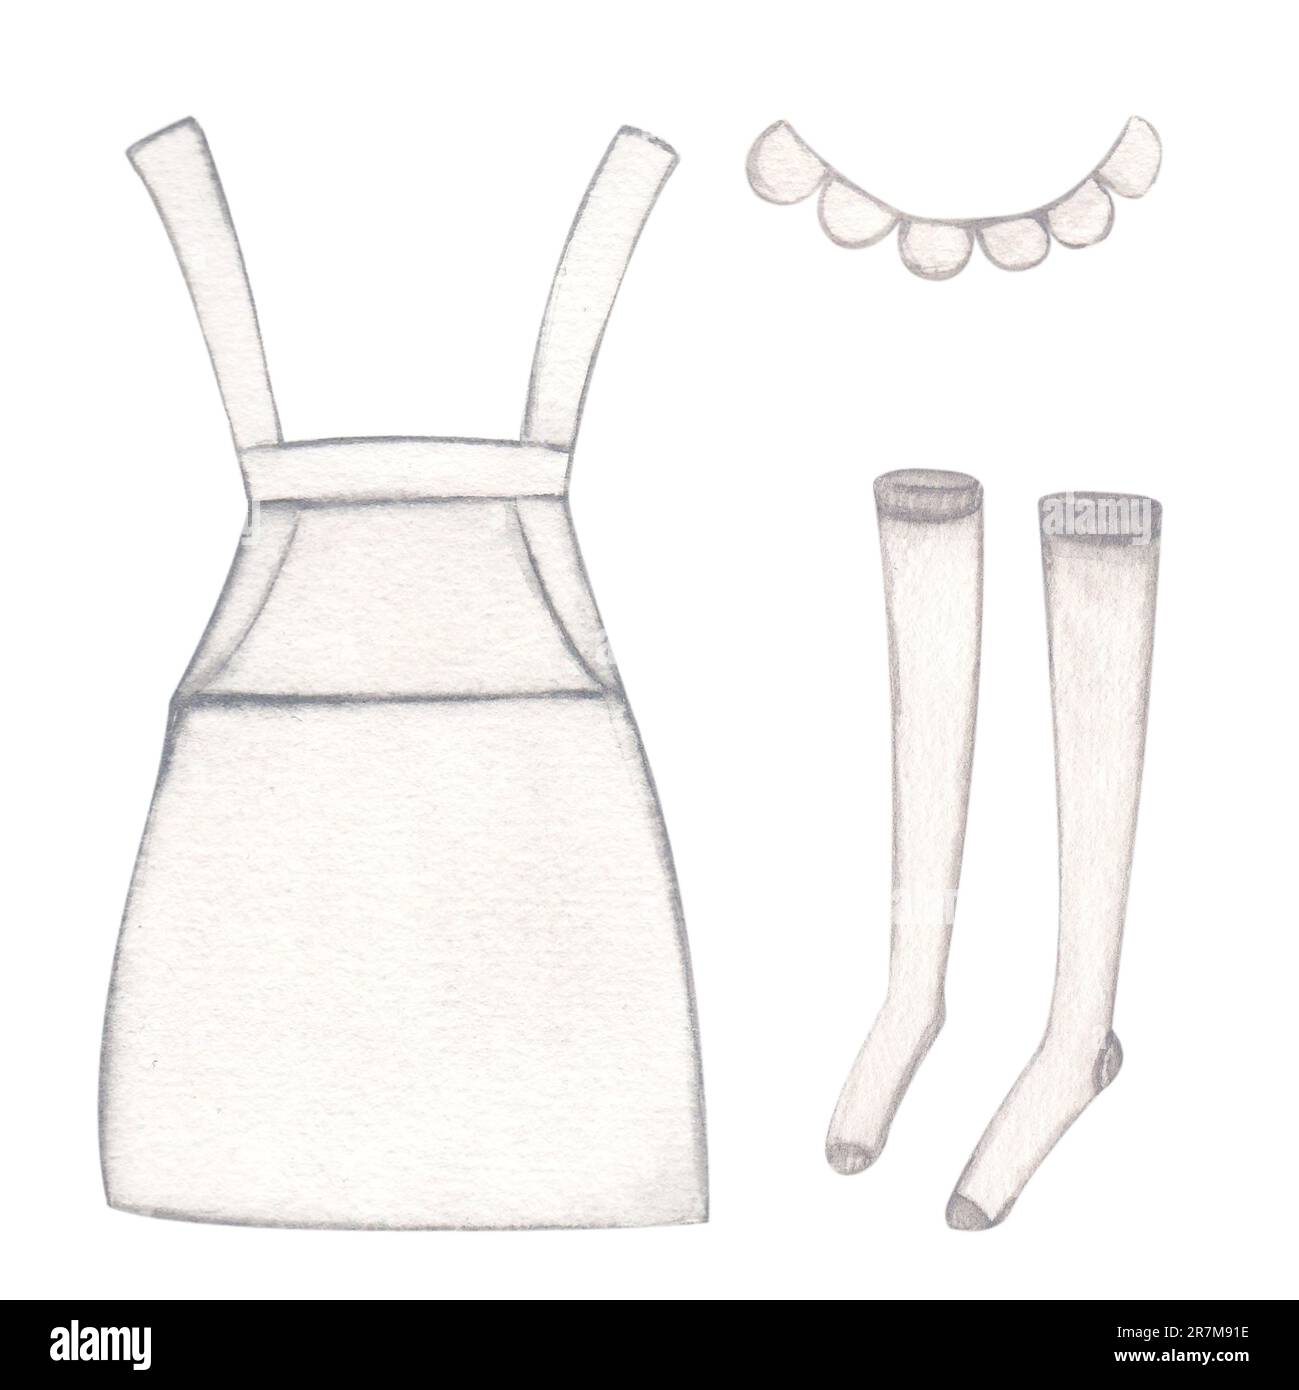 Laundry. Set of illustration of clothes, apron, stockings and collar. Watercolor on a white background. Hand-drawn. For postcards. Stock Photo